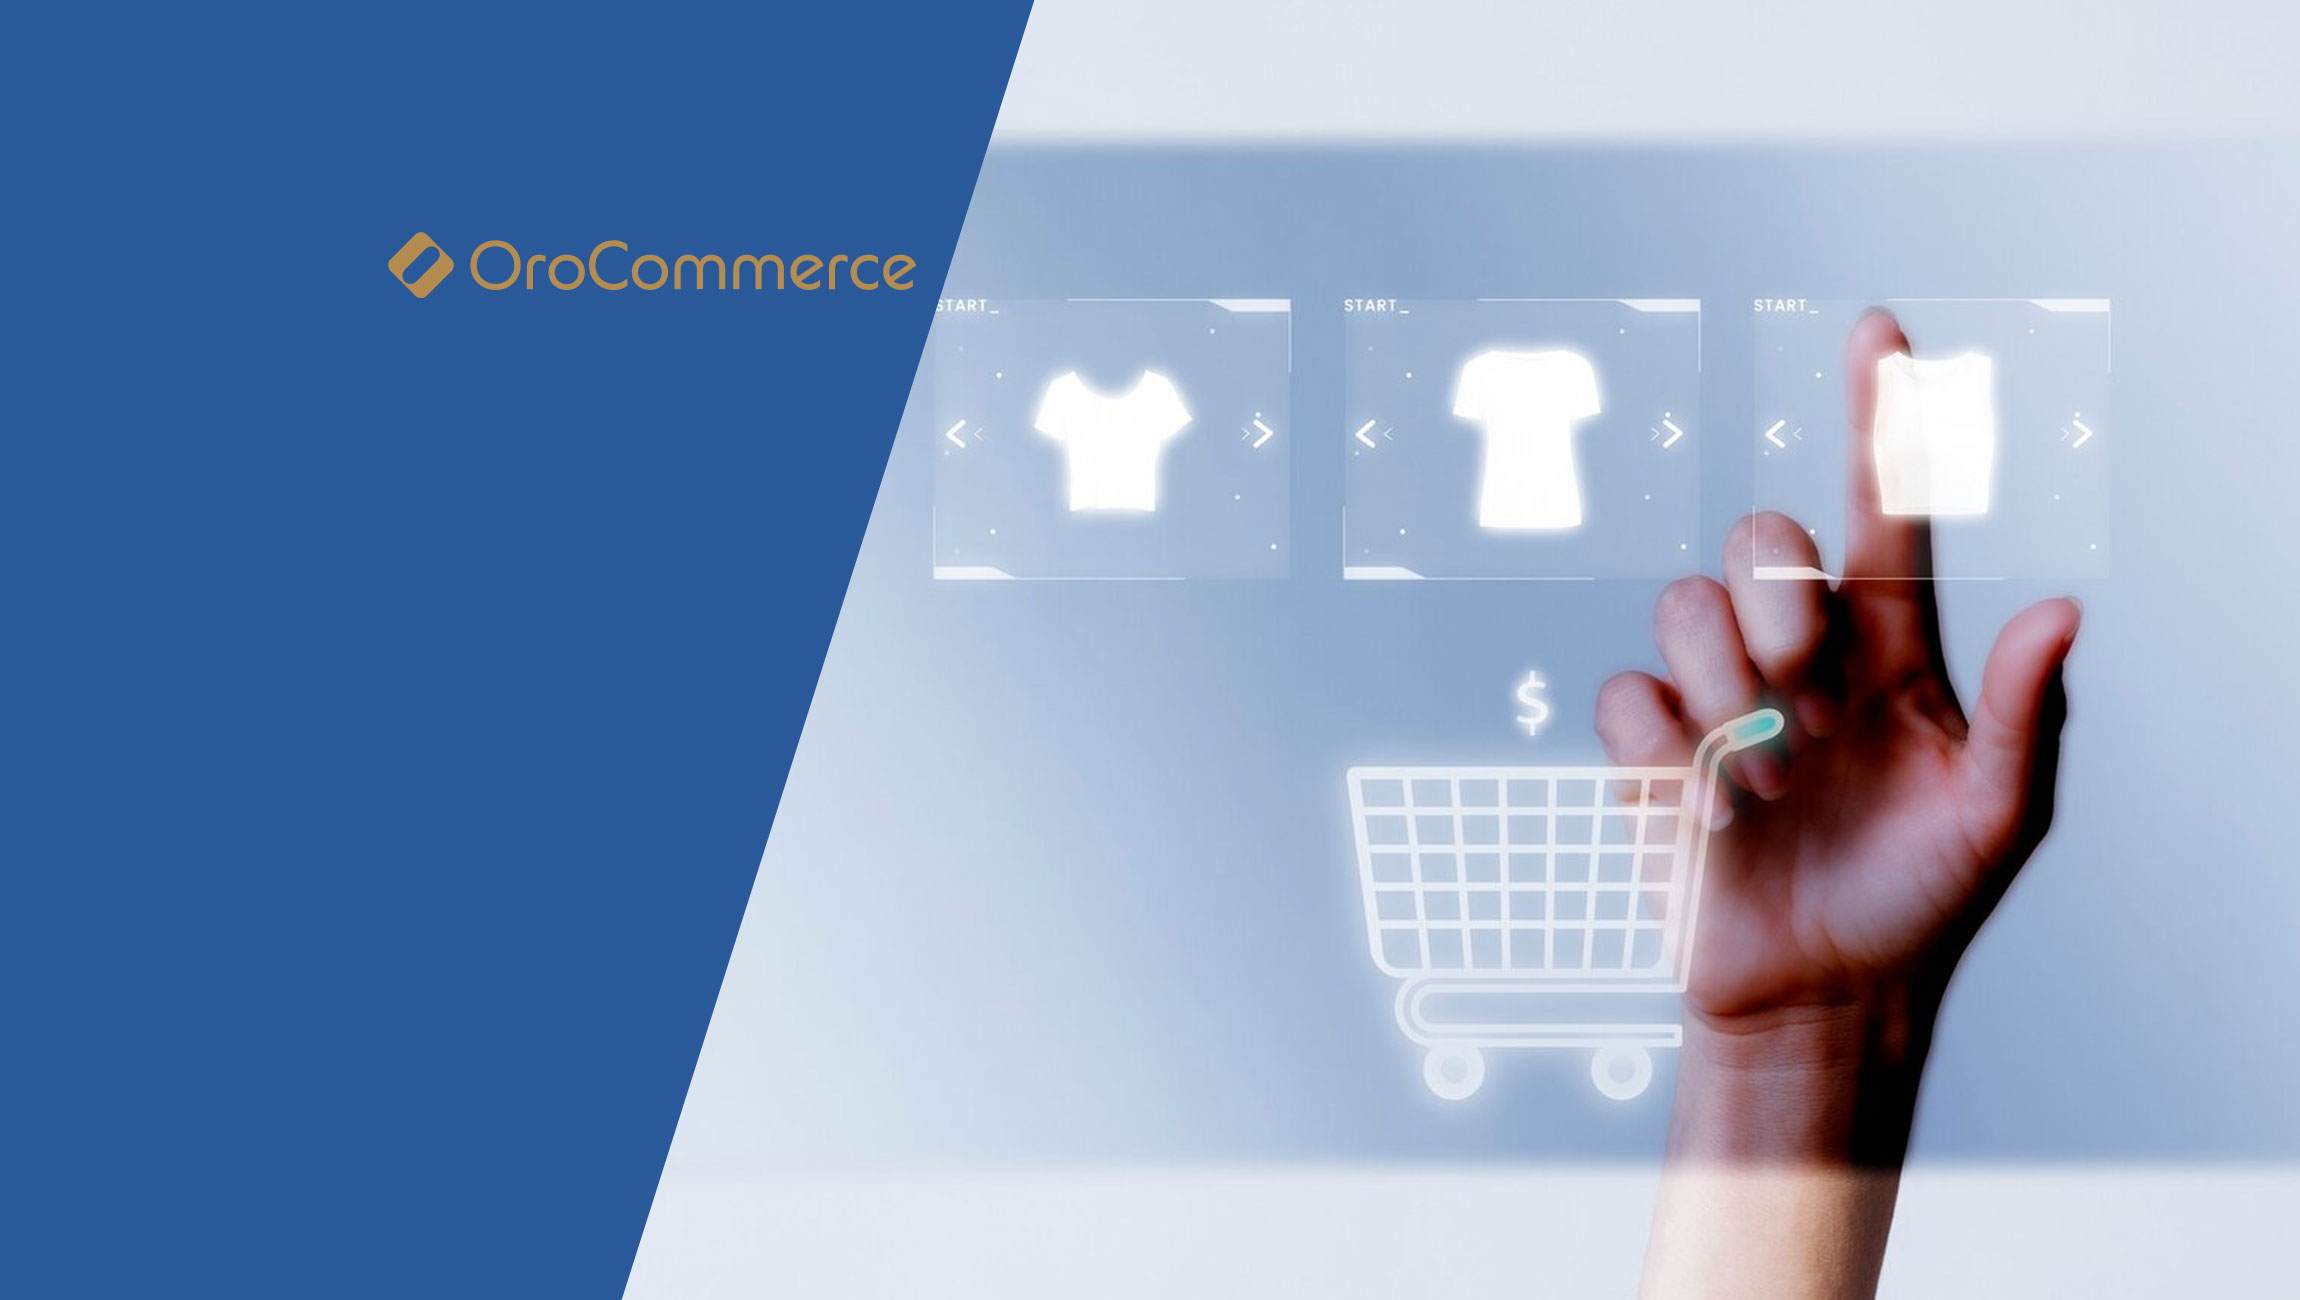 OroCommerce Unveils Unified Brand Aligned with Vision for the Future of B2B eCommerce